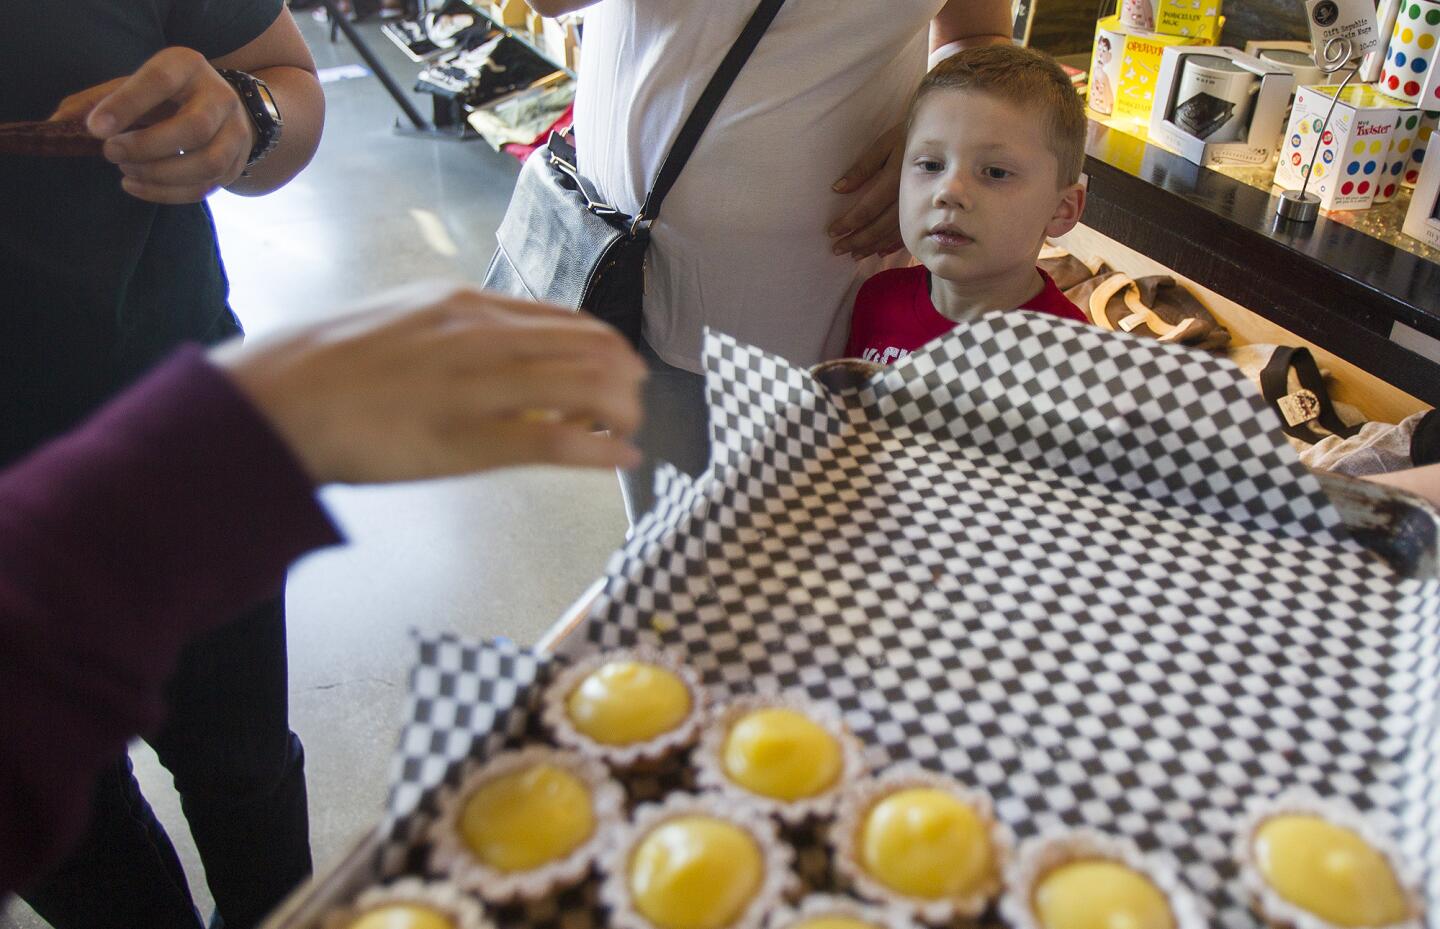 Cash Peoples, 4, eyes a lemon curd tart sample at the Blackmarket Bakery during an open house to celebrate the one-year anniversary of the bakery being open at The Camp in on Saturday, January 25. (Scott Smeltzer, Daily Pilot)